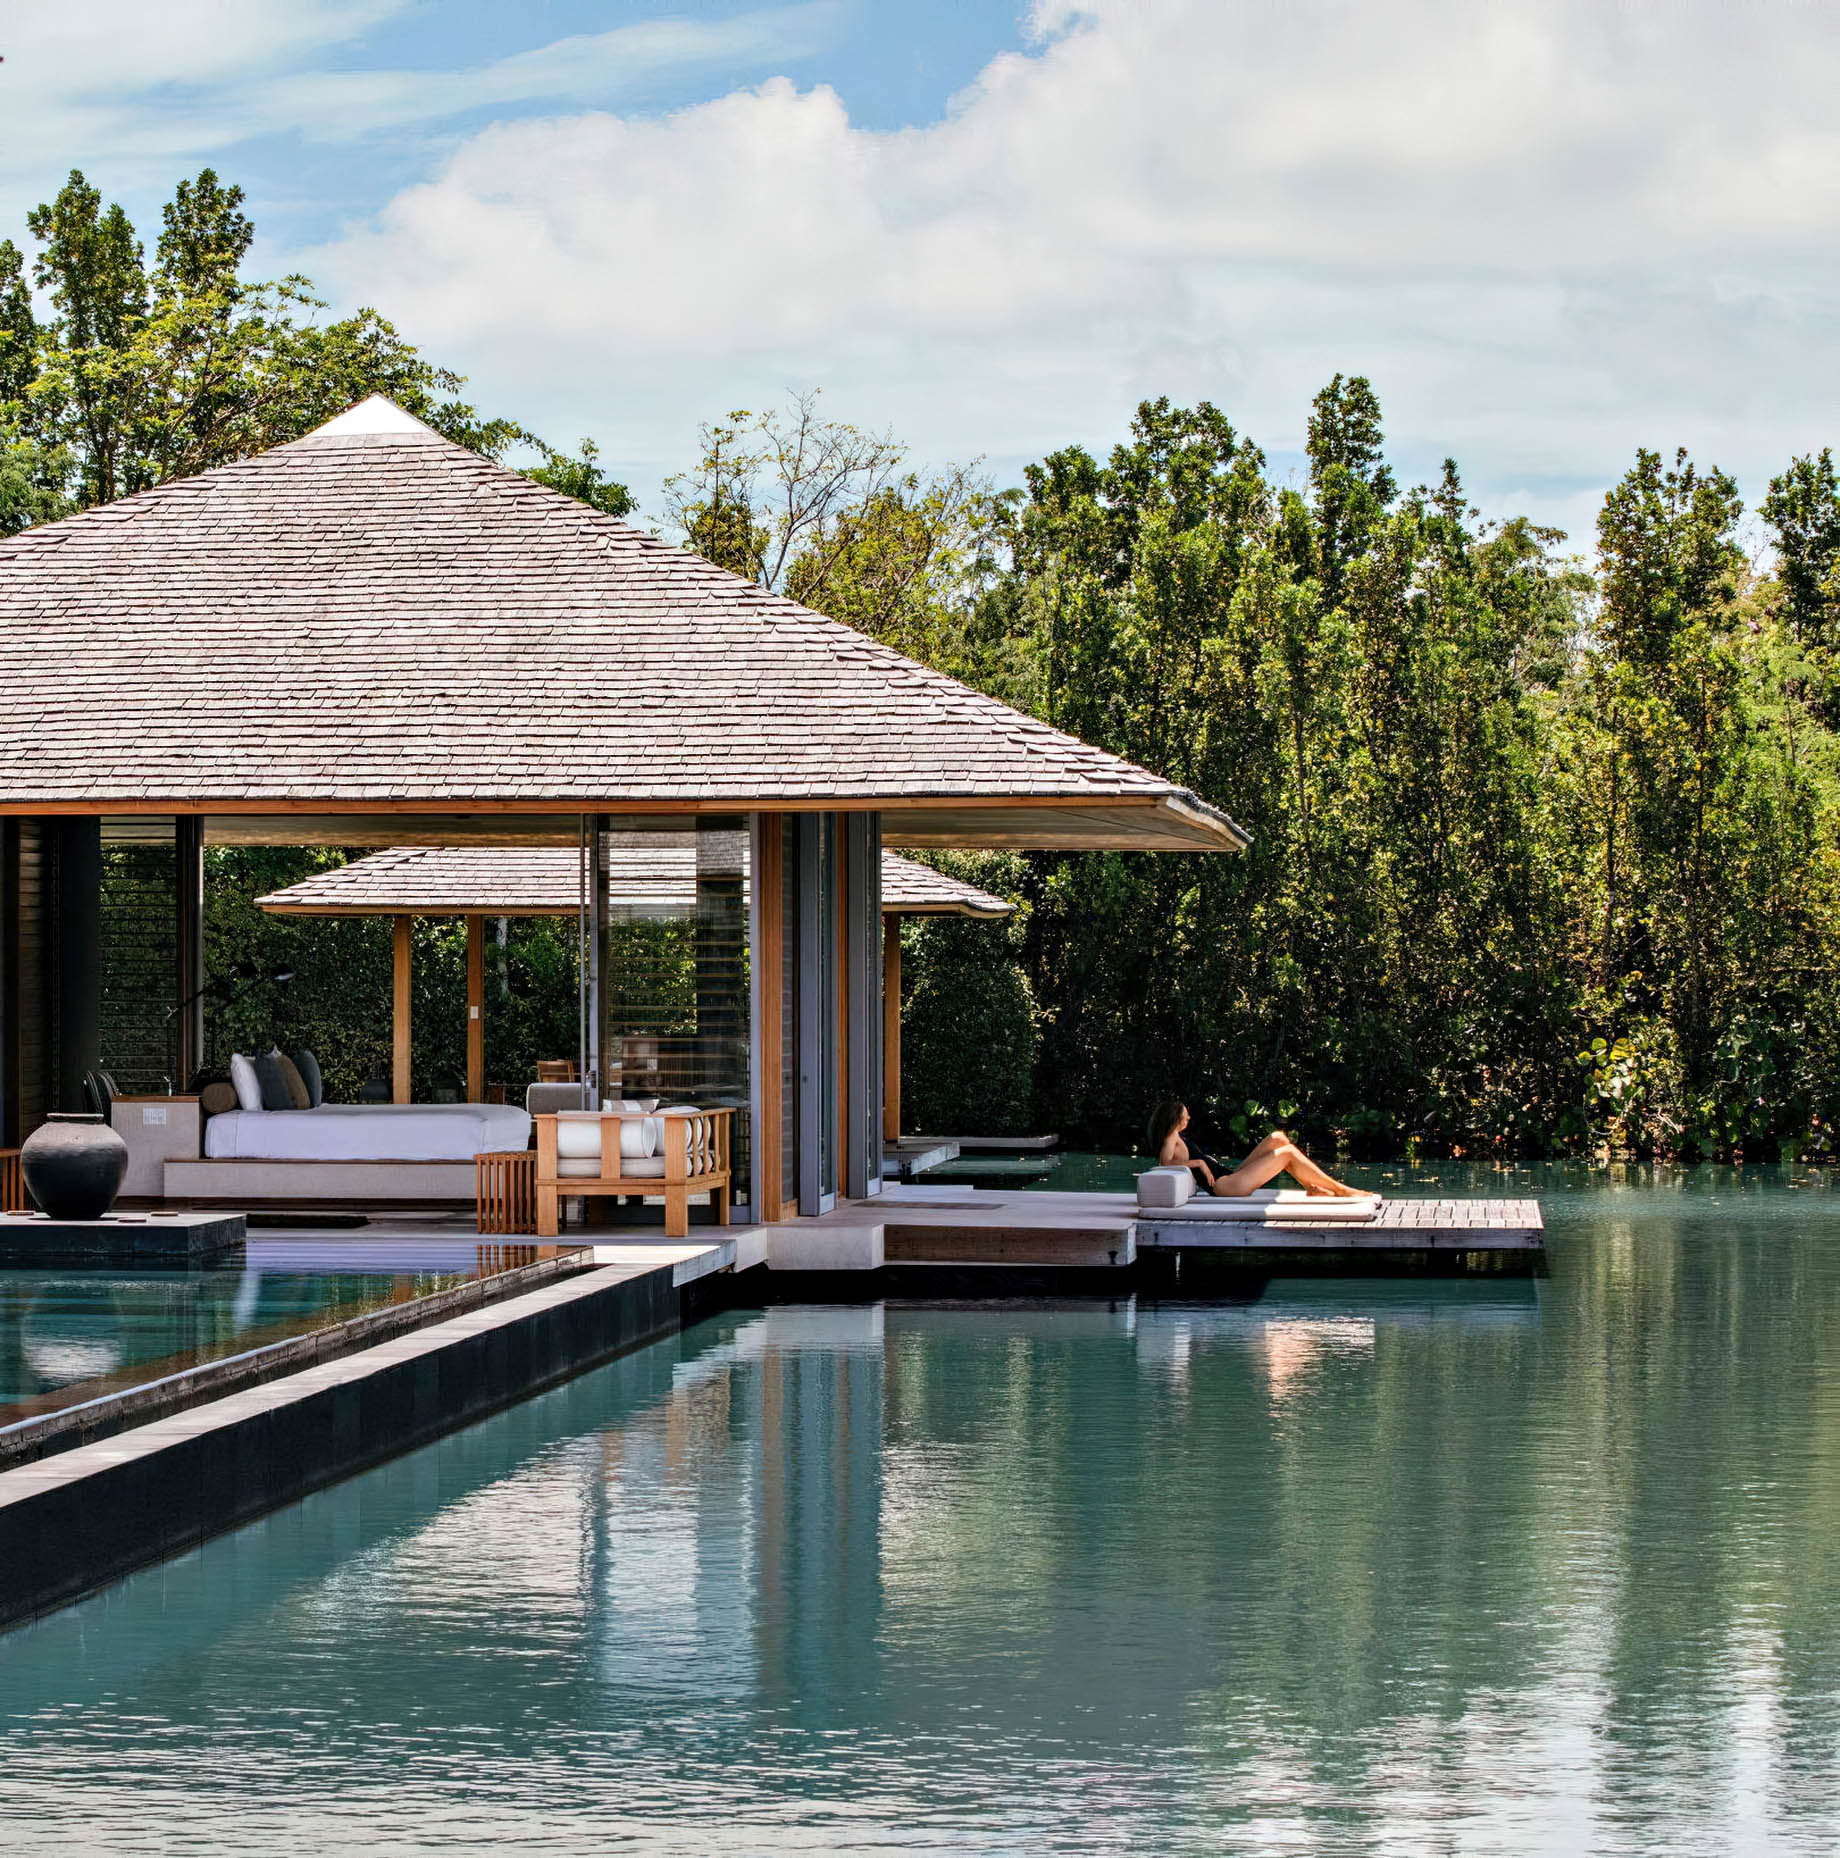 Amanyara Resort - Providenciales, Turks and Caicos Islands - Poolside Relaxation